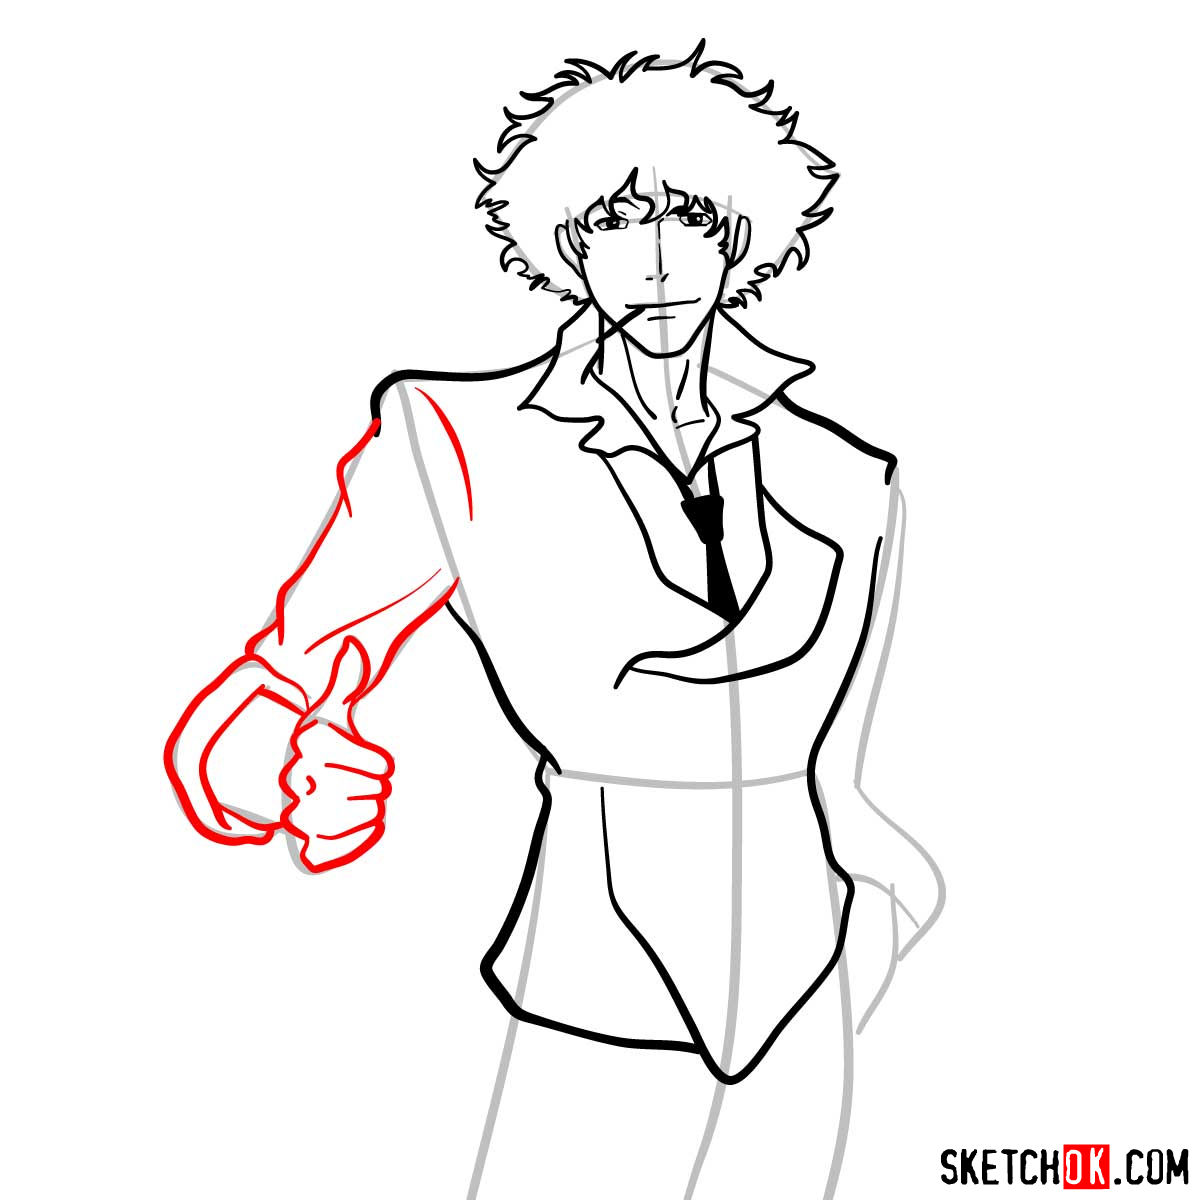 How to draw Spike Spiegel from Cowboy Bebop anime - step 09